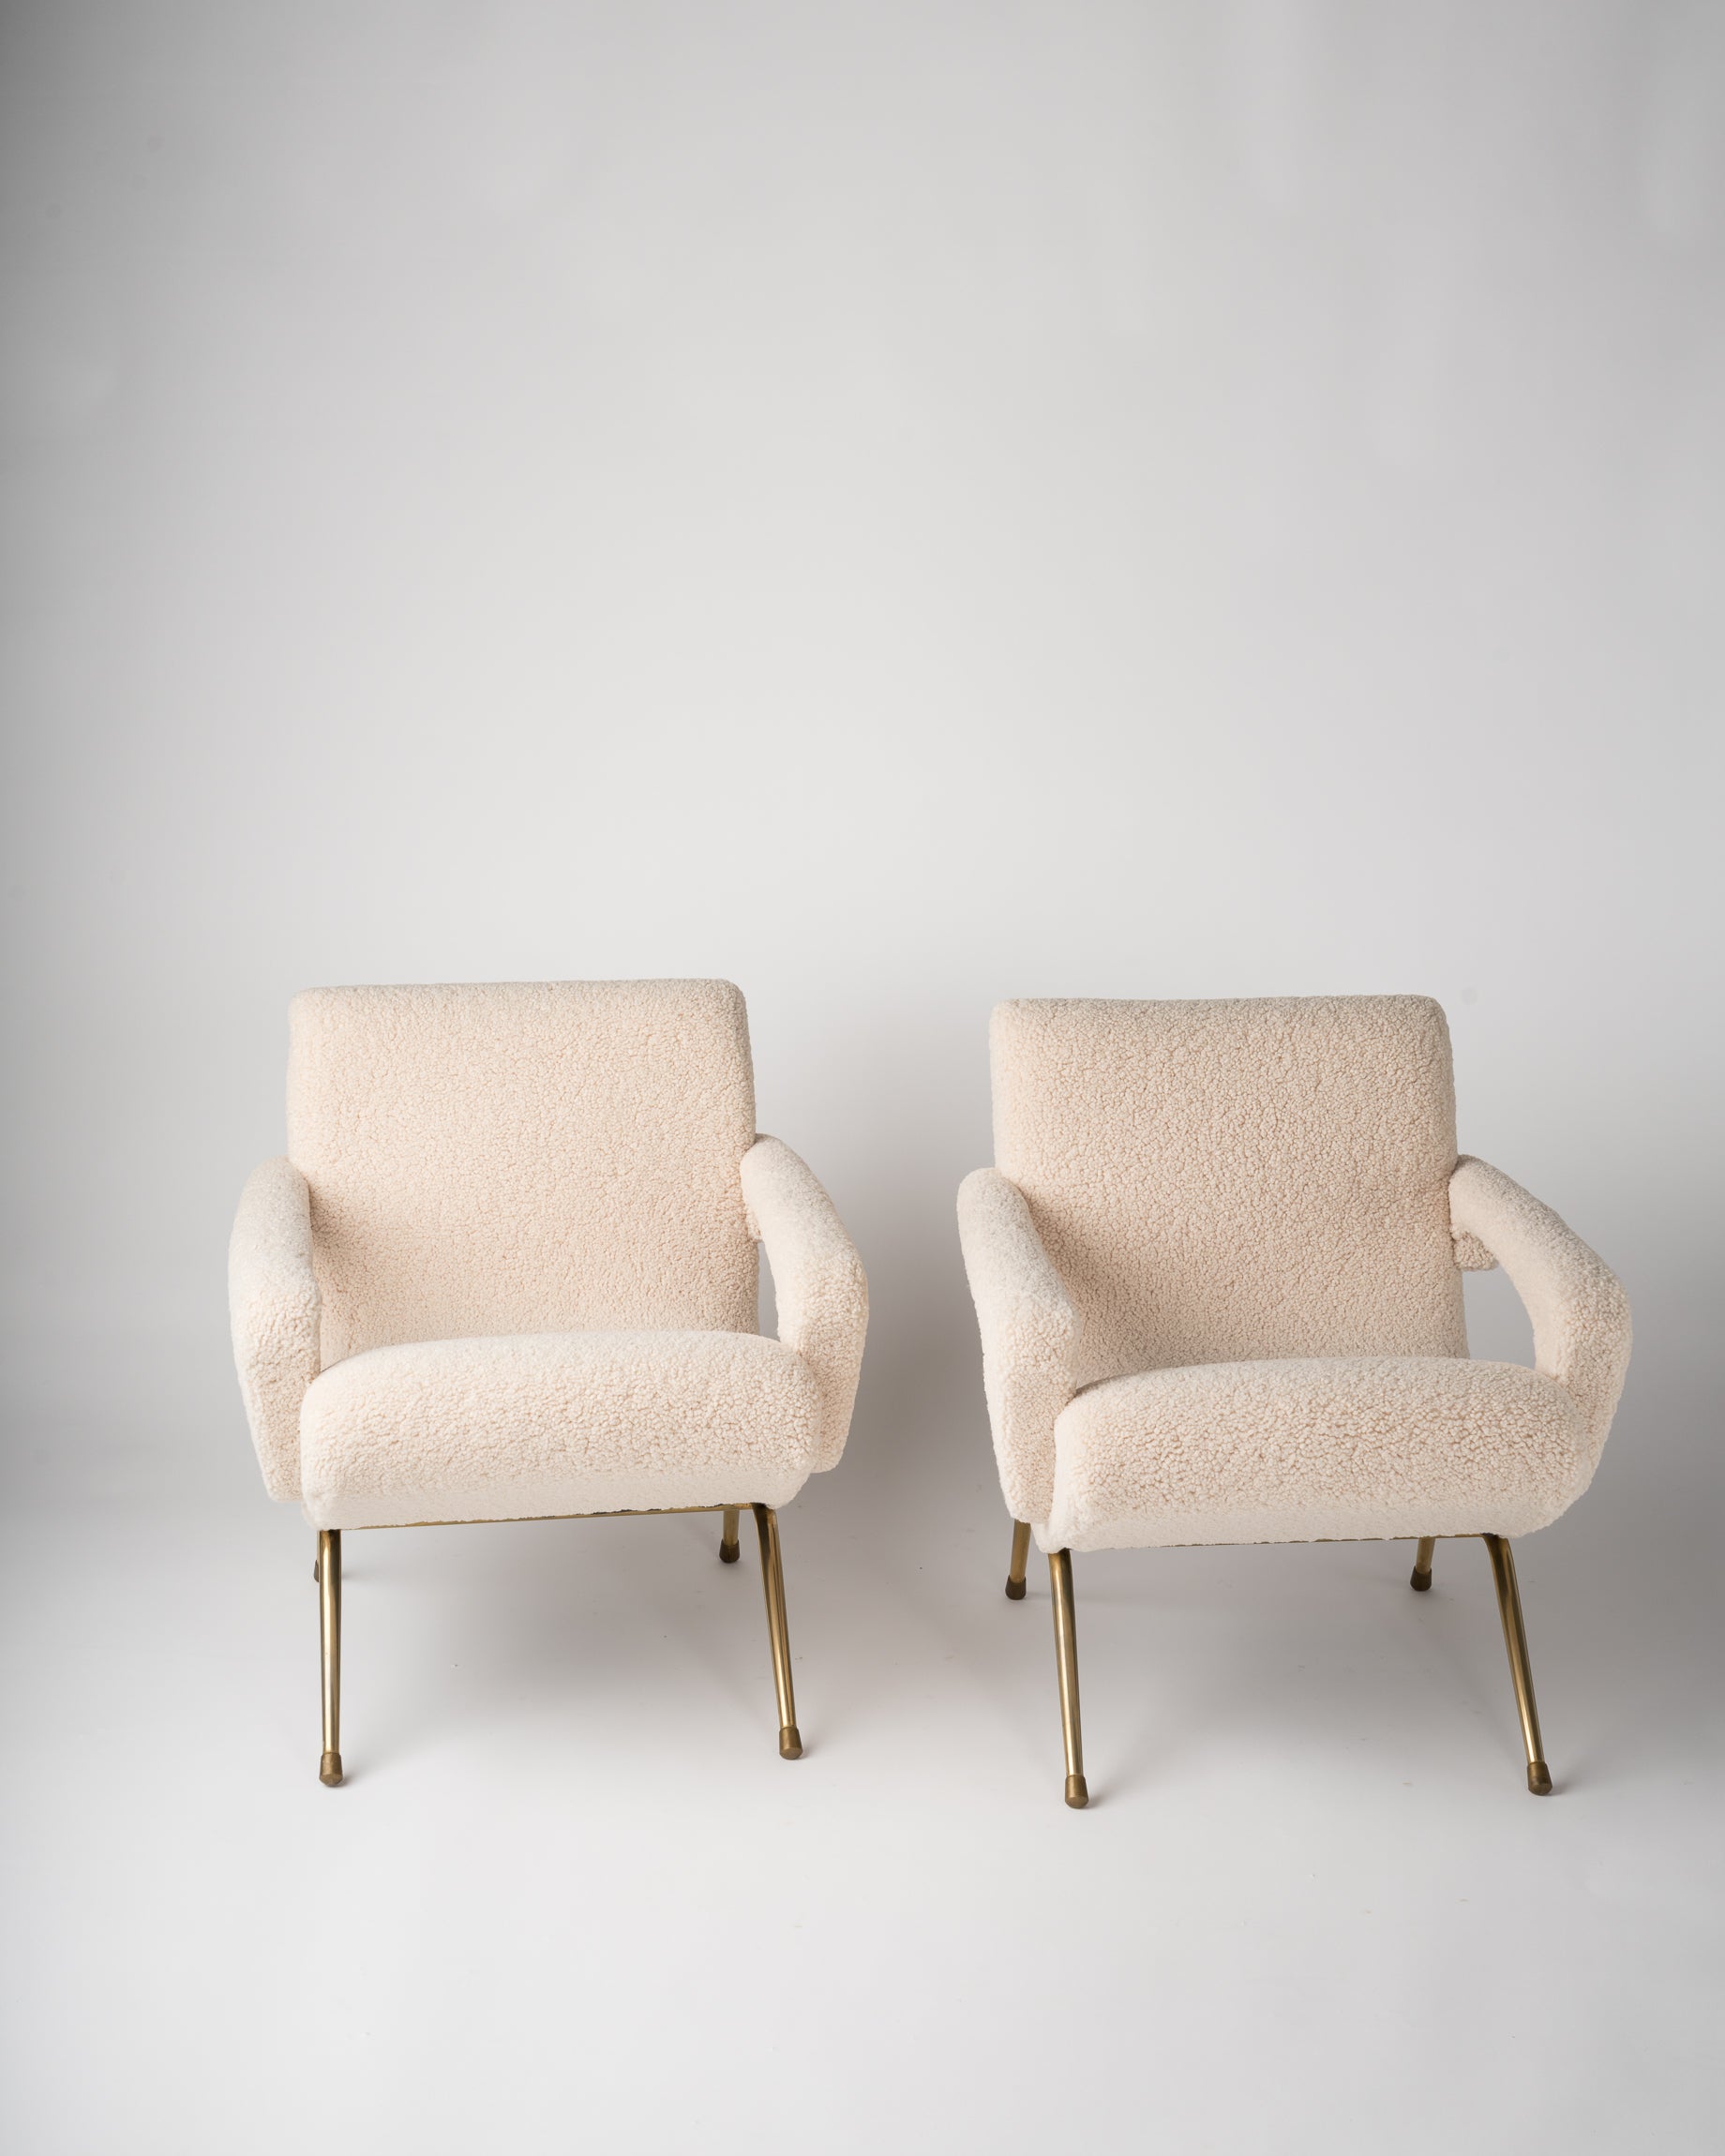 Pair of Mid-Century Modern Compact Armchairs in Creme Bouclé by Cabrol, France, 1950s